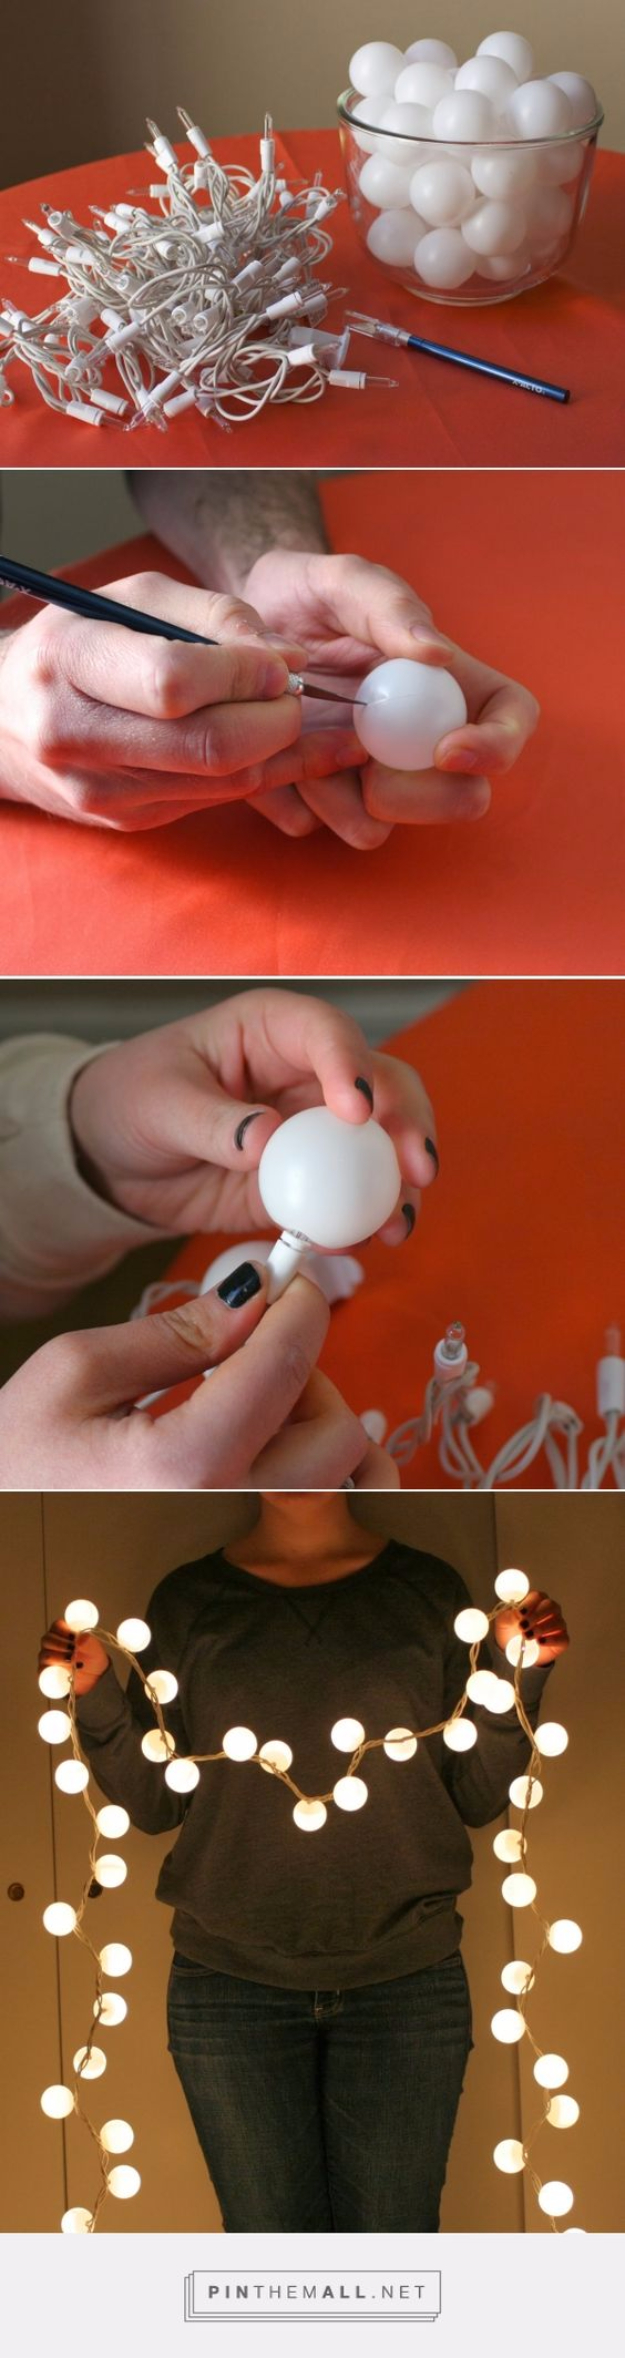 DIY Lighting Ideas for Teen and Kids Rooms -Ping Pong Ball Lights - Fun DIY Lights like Lamps, Pendants, Chandeliers and Hanging Fixtures for the Bedroom plus cool ideas With String Lights. Perfect for Girls and Boys Rooms, Teenagers and Dorm Room Decor 